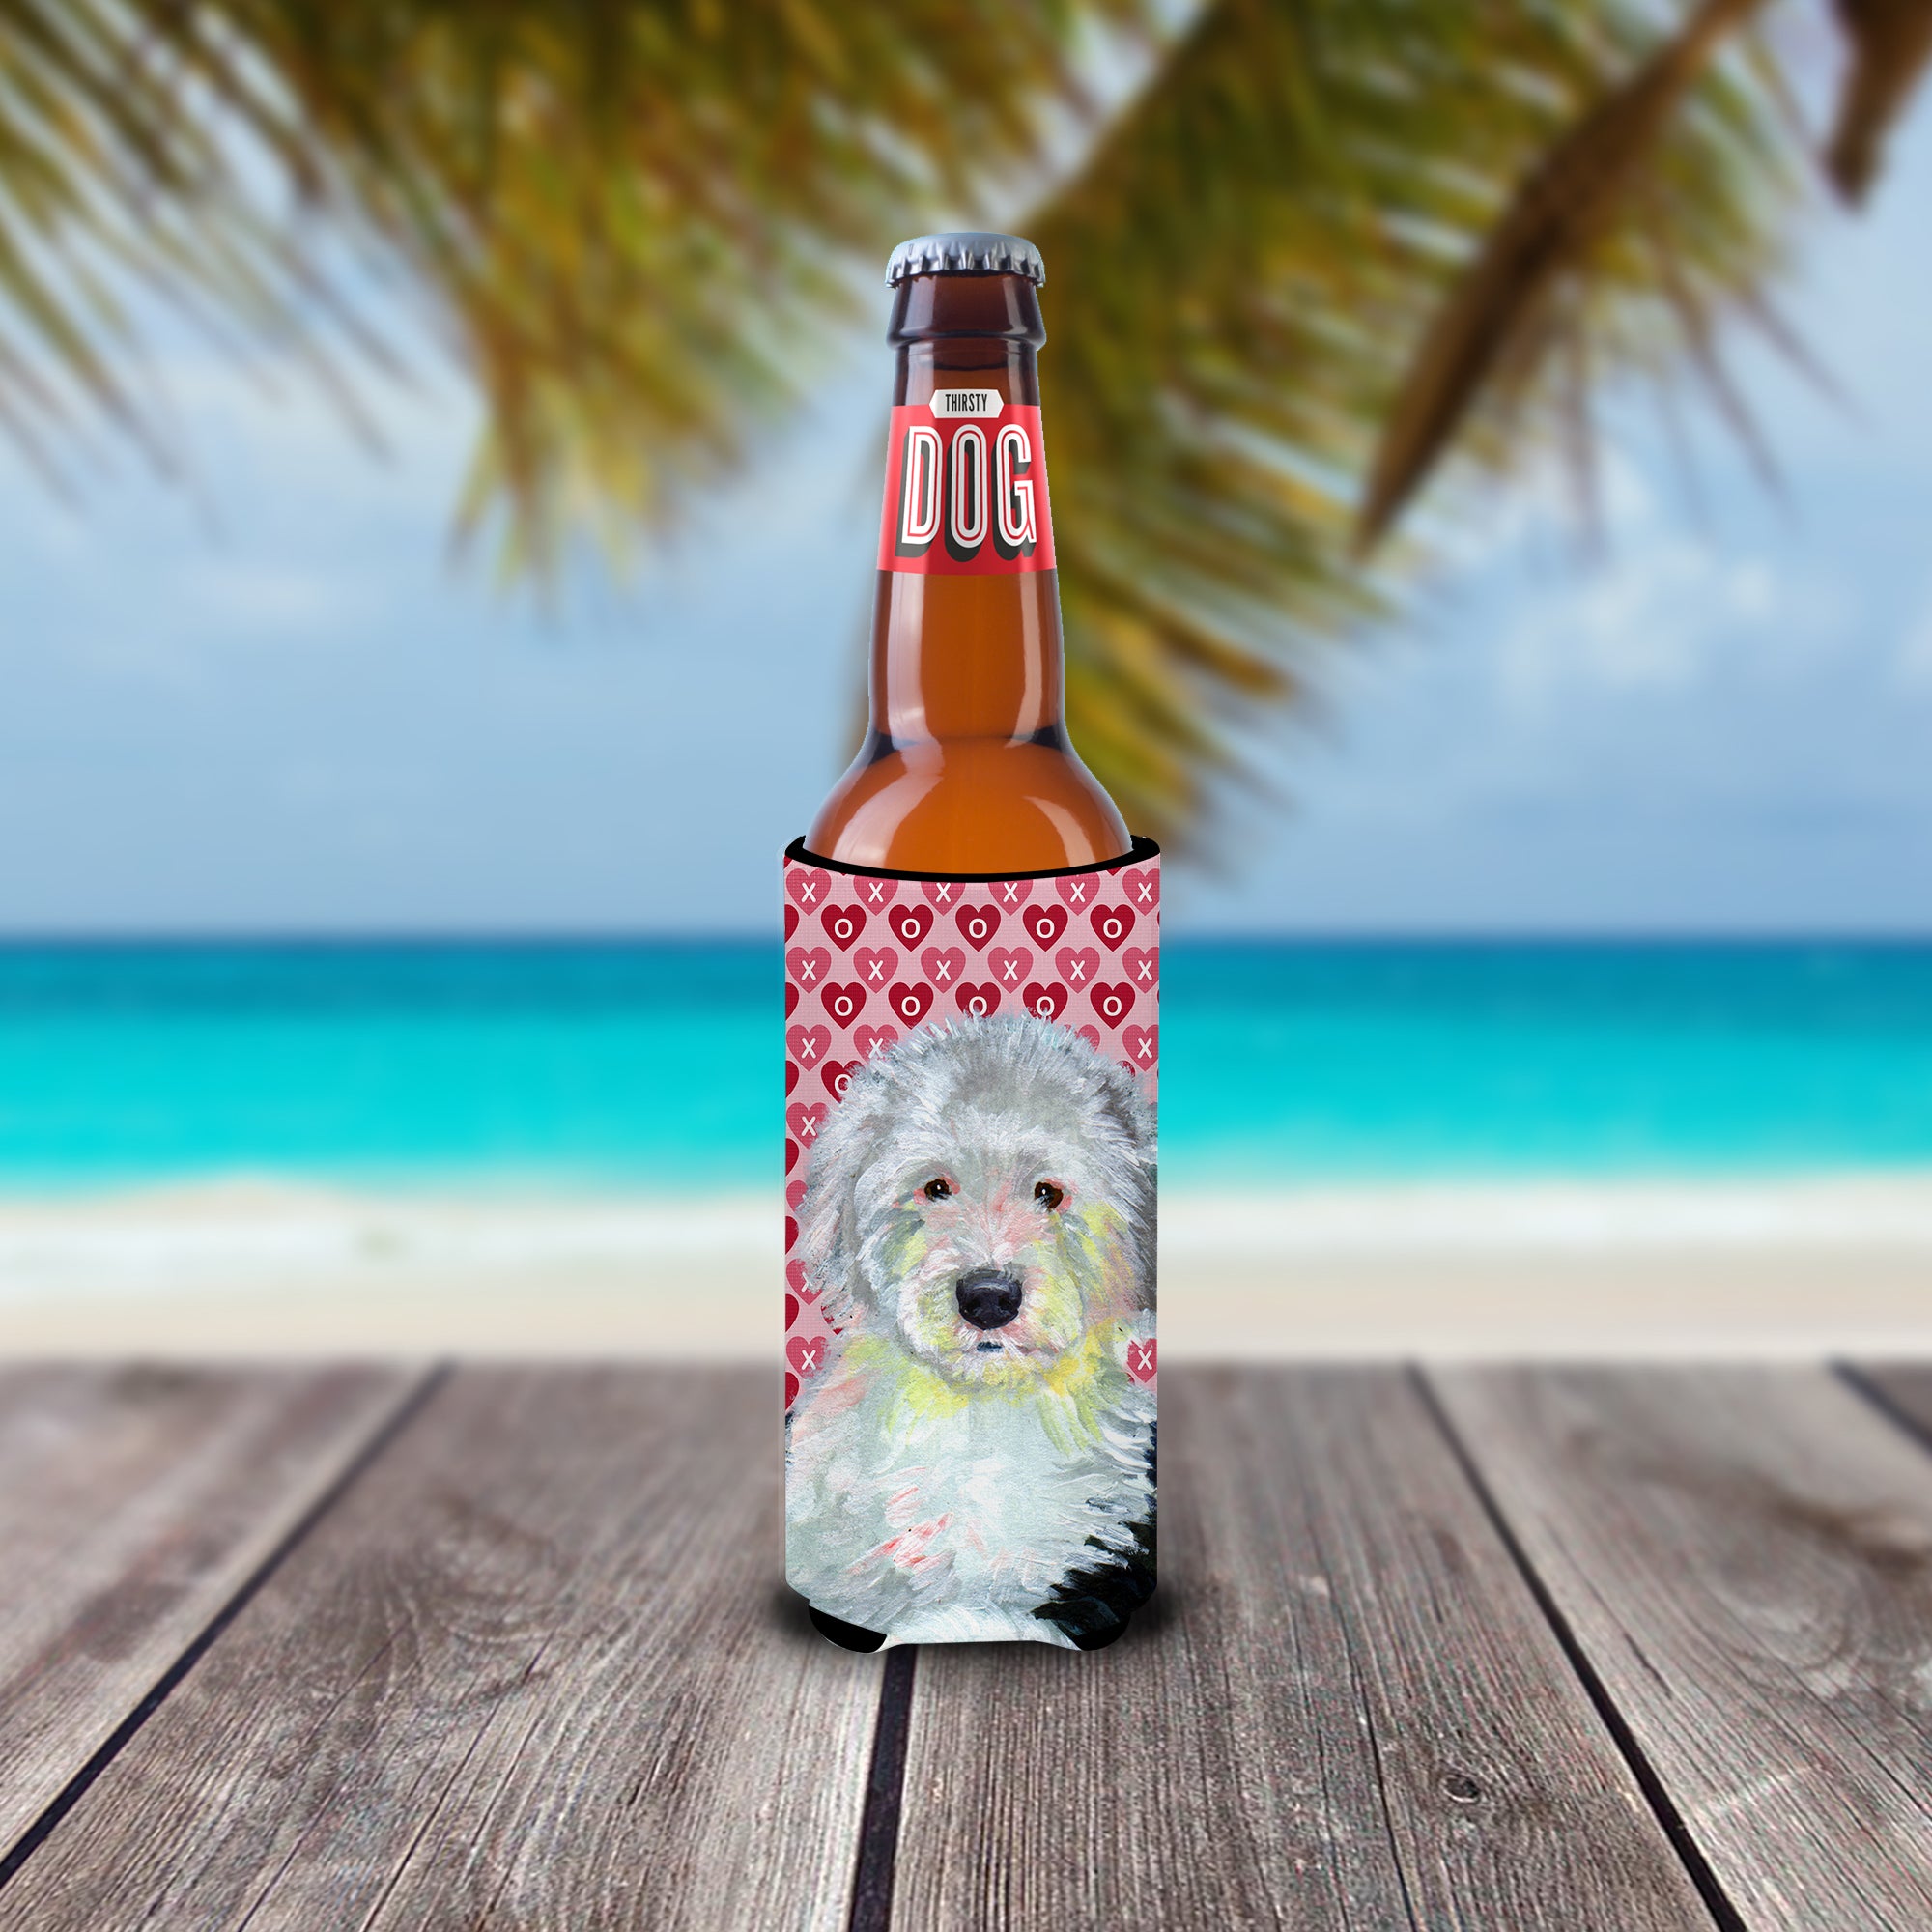 Old English Sheepdog Hearts Love and Valentine's Day Portrait Ultra Beverage Insulators for slim cans LH9171MUK.